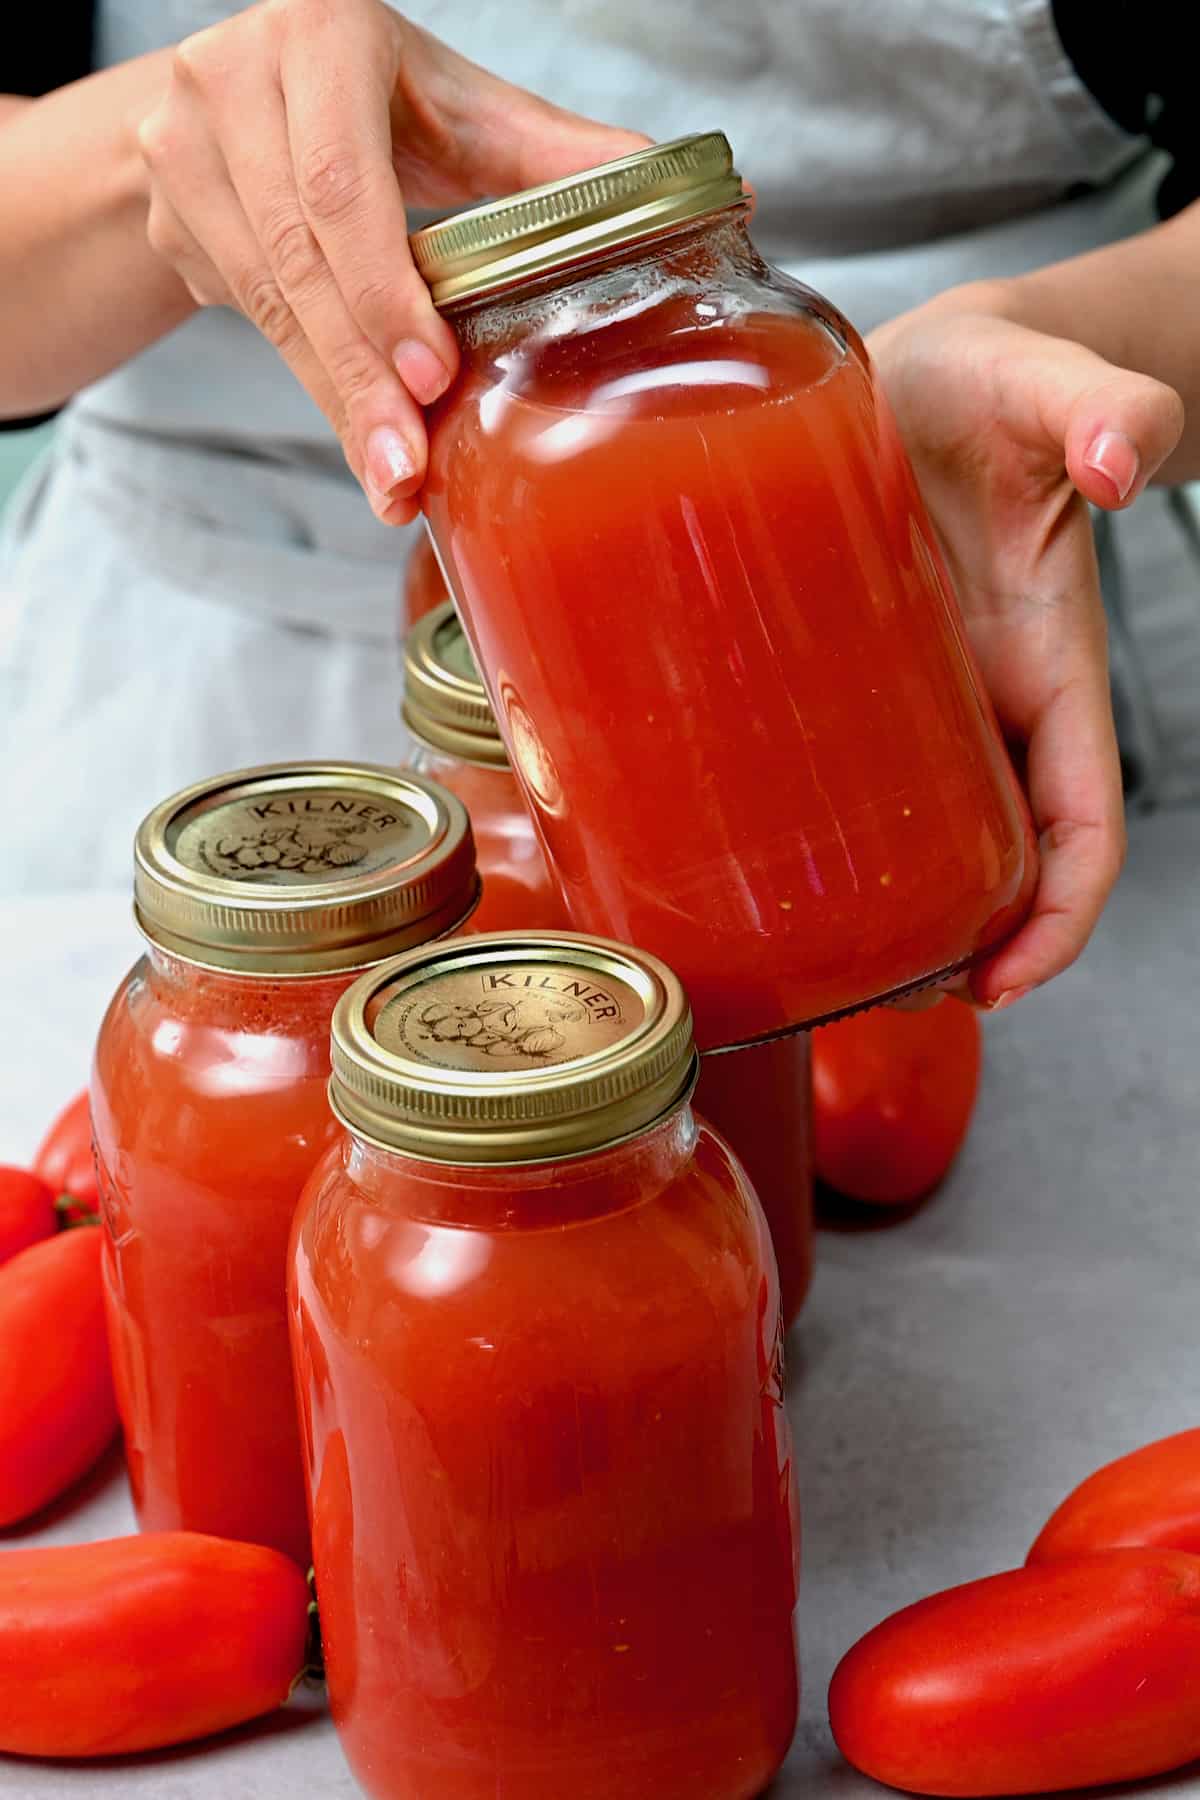 Holding a jar with canned tomato juice